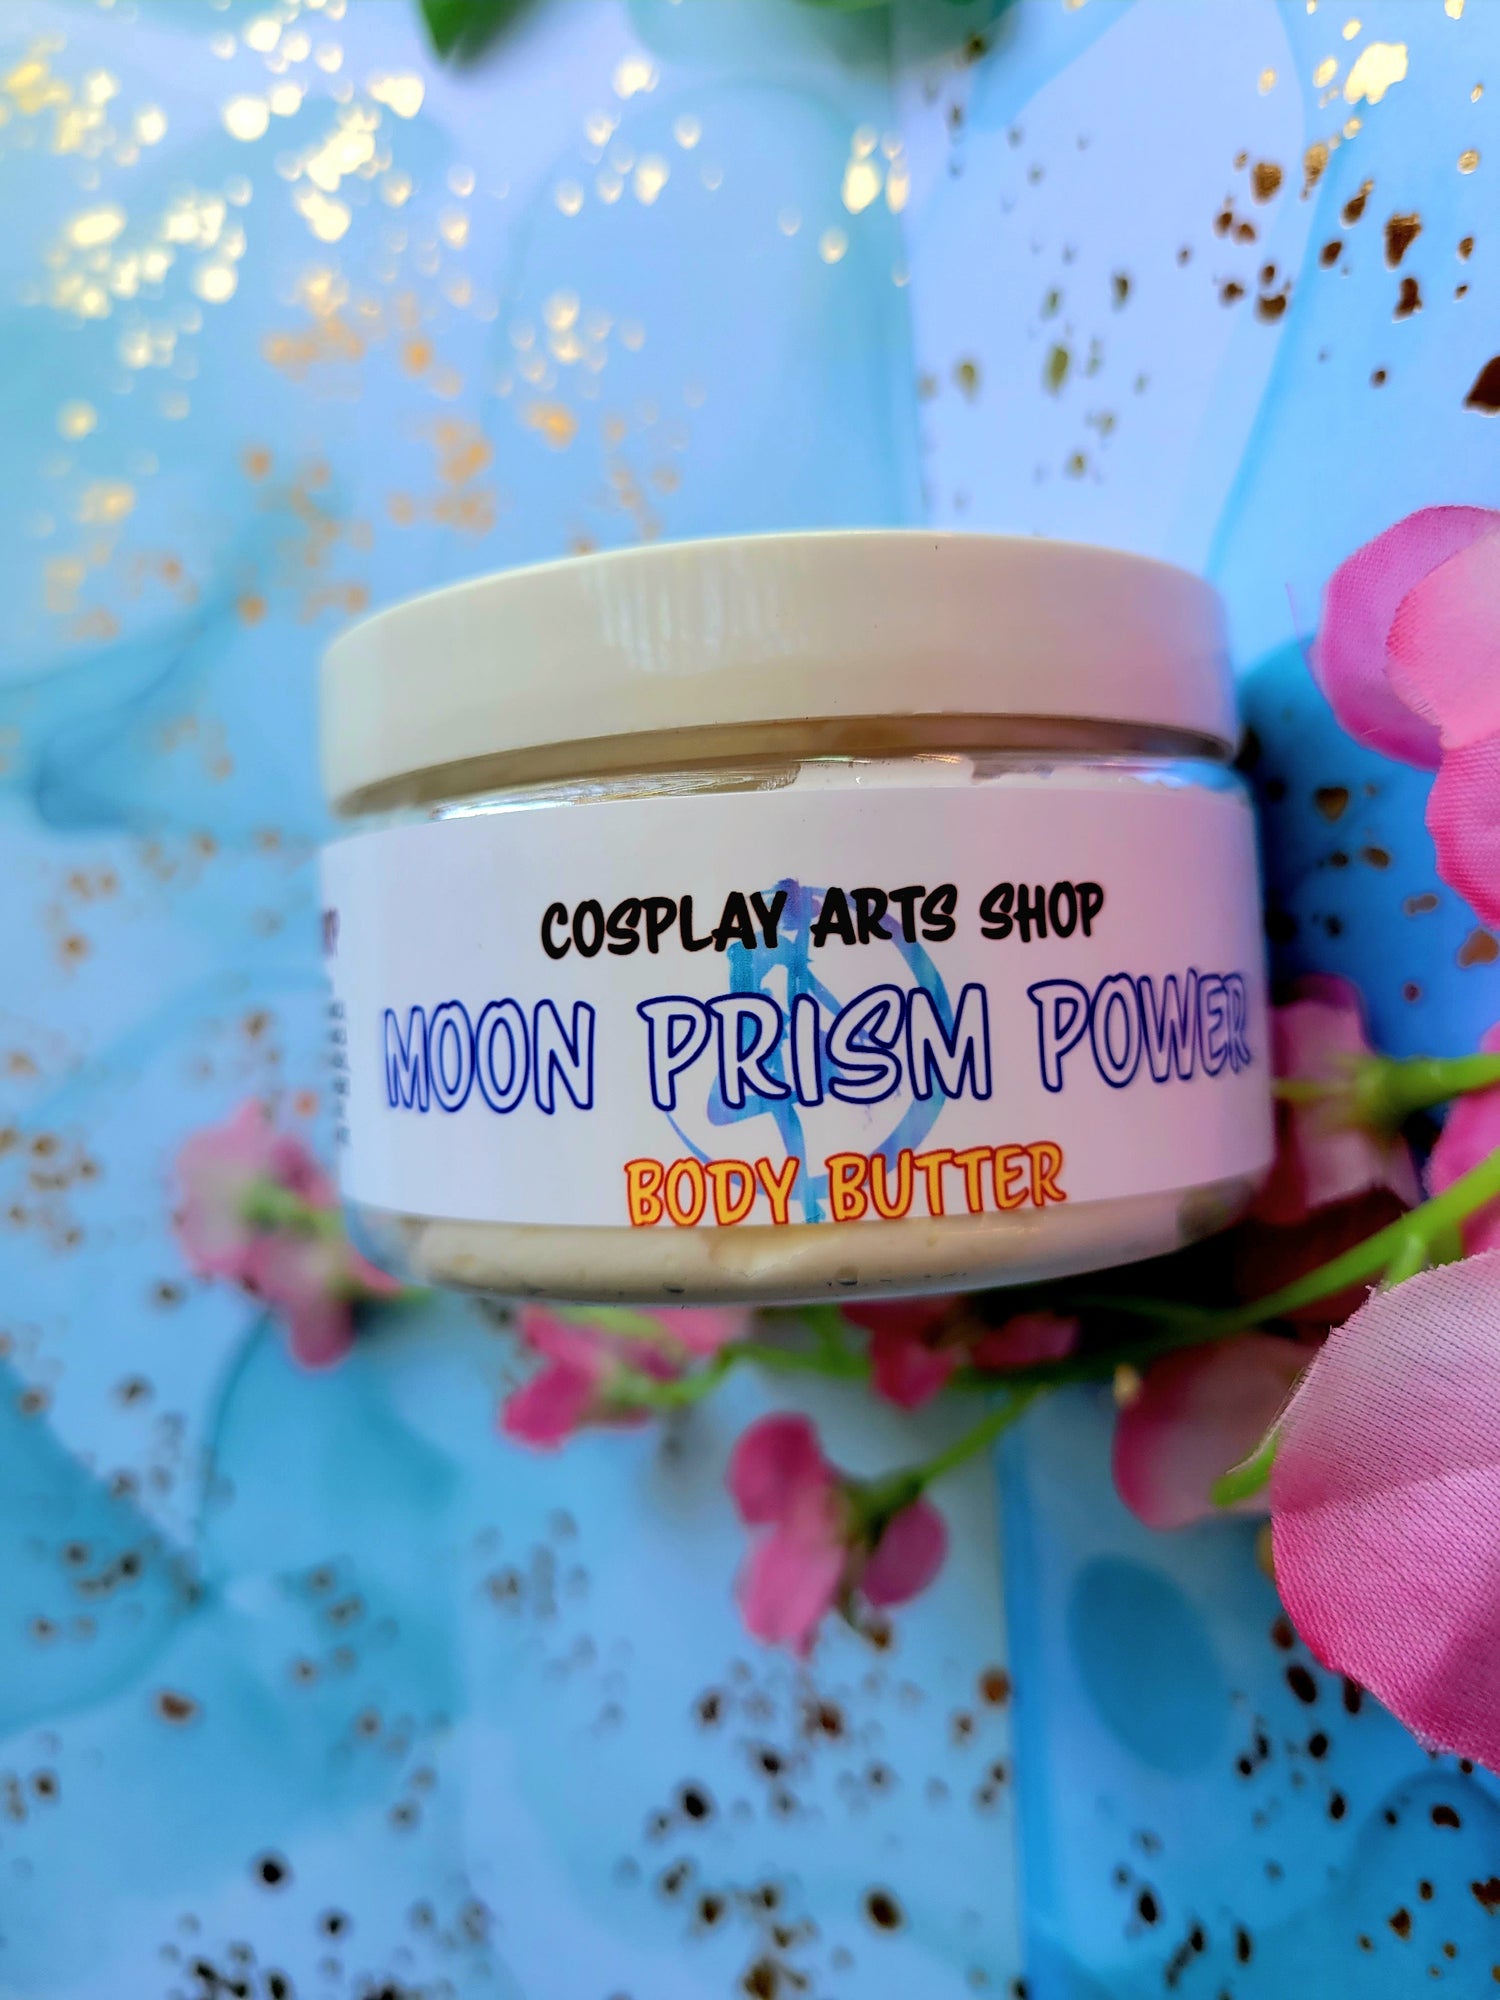 Moon Prism Power Body Butter - Cosplay Arts Shop